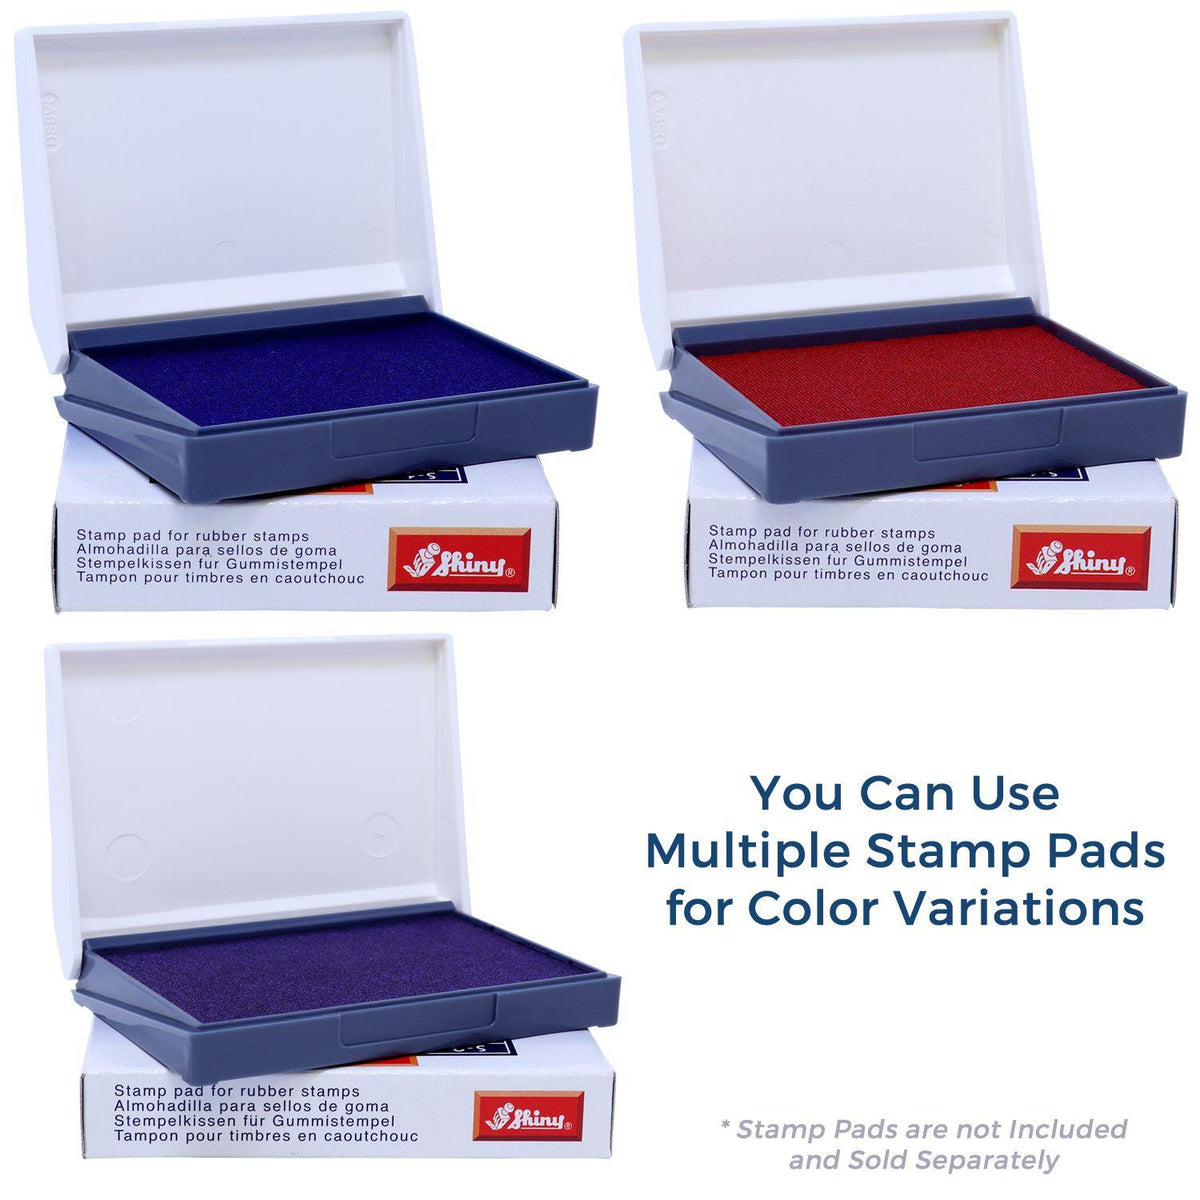 Stamp Pads for Ira Rubber Stamp Available